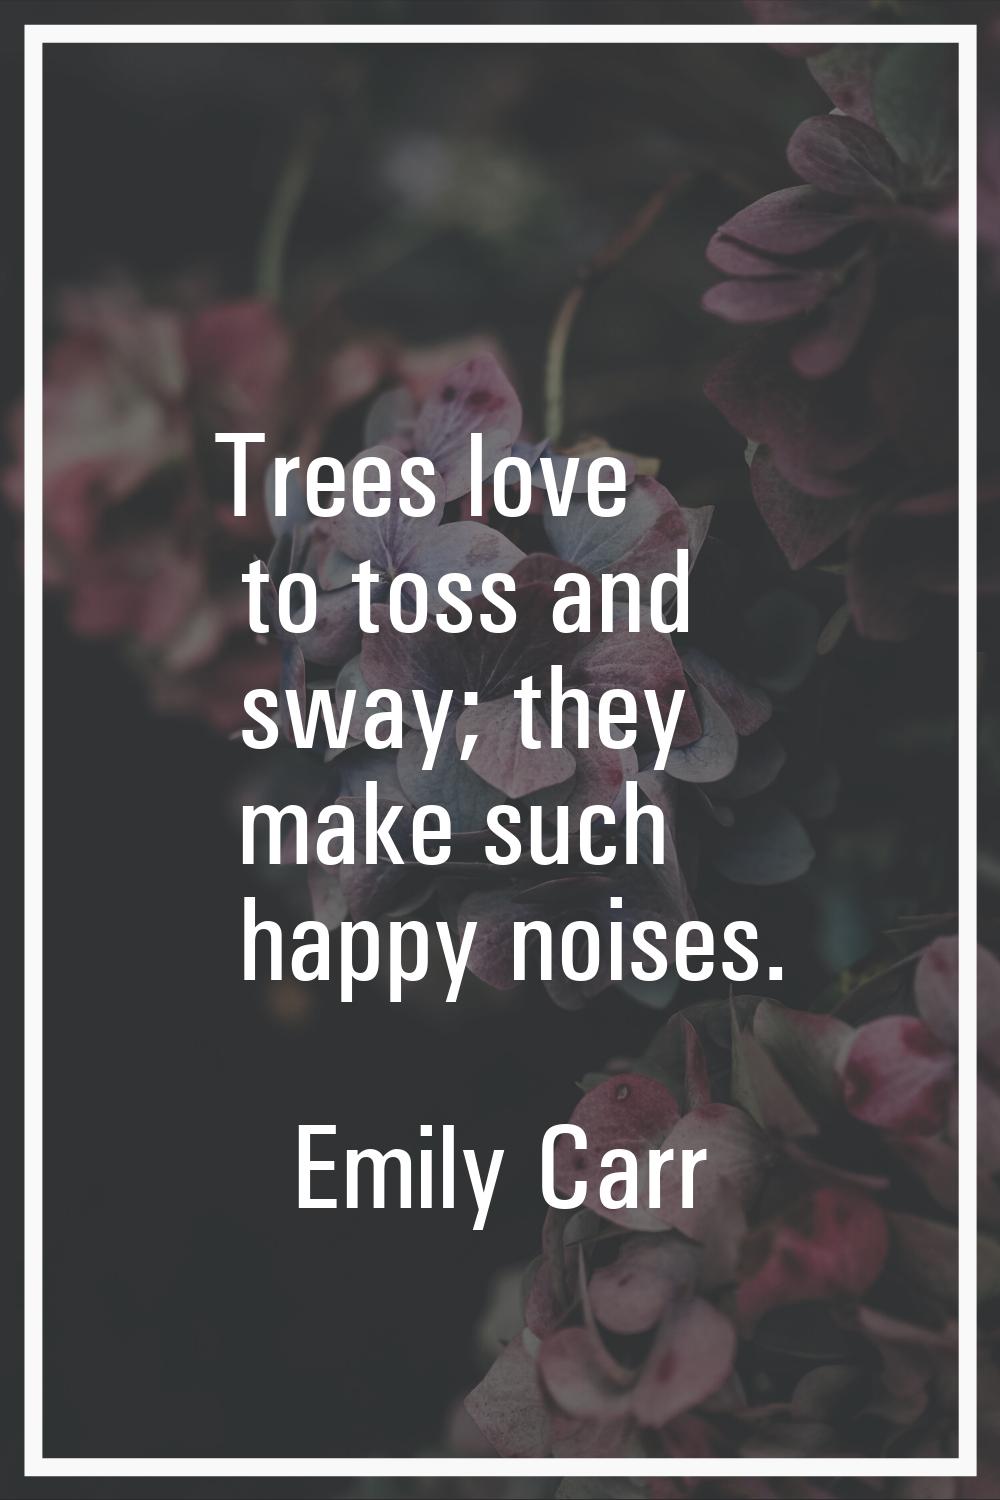 Trees love to toss and sway; they make such happy noises.